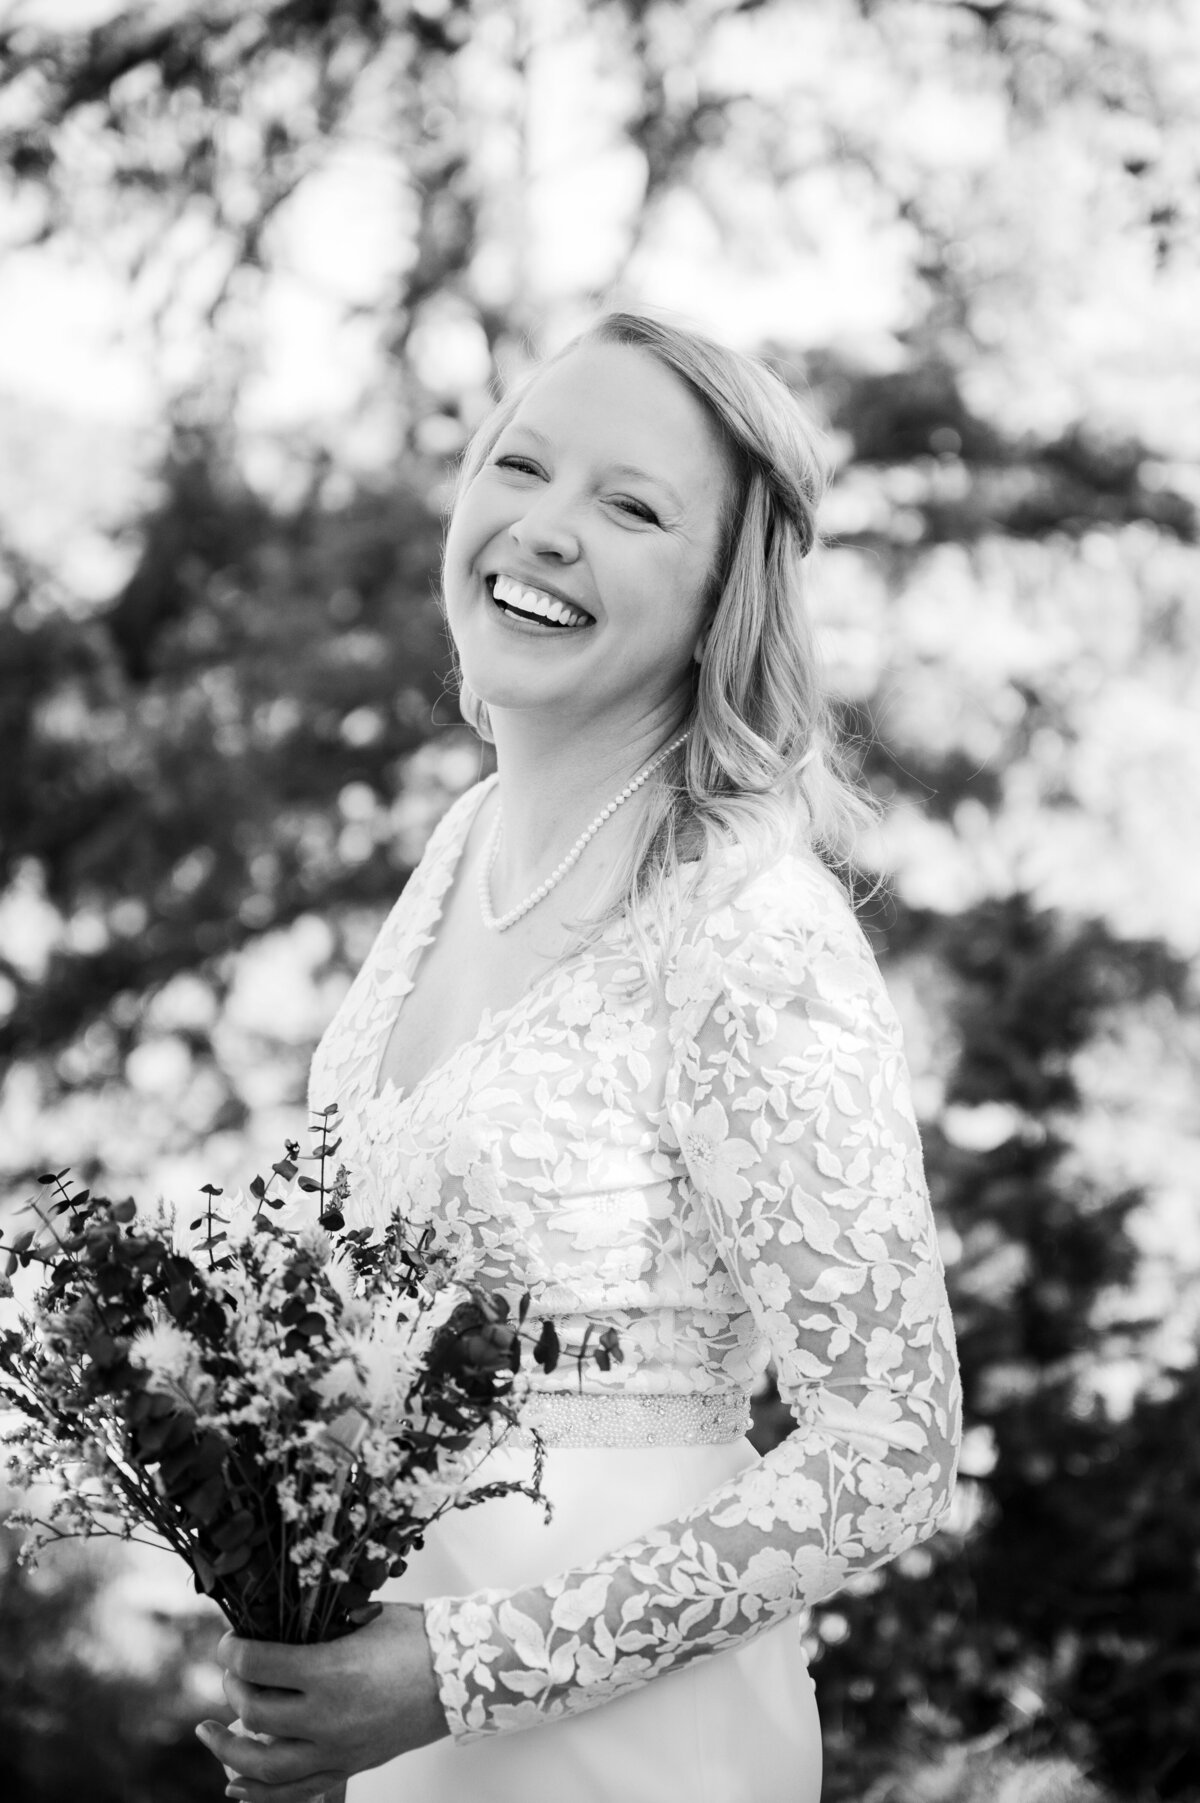 A bride in a long sleeve wedding dress throws her head back candidly and laughs.